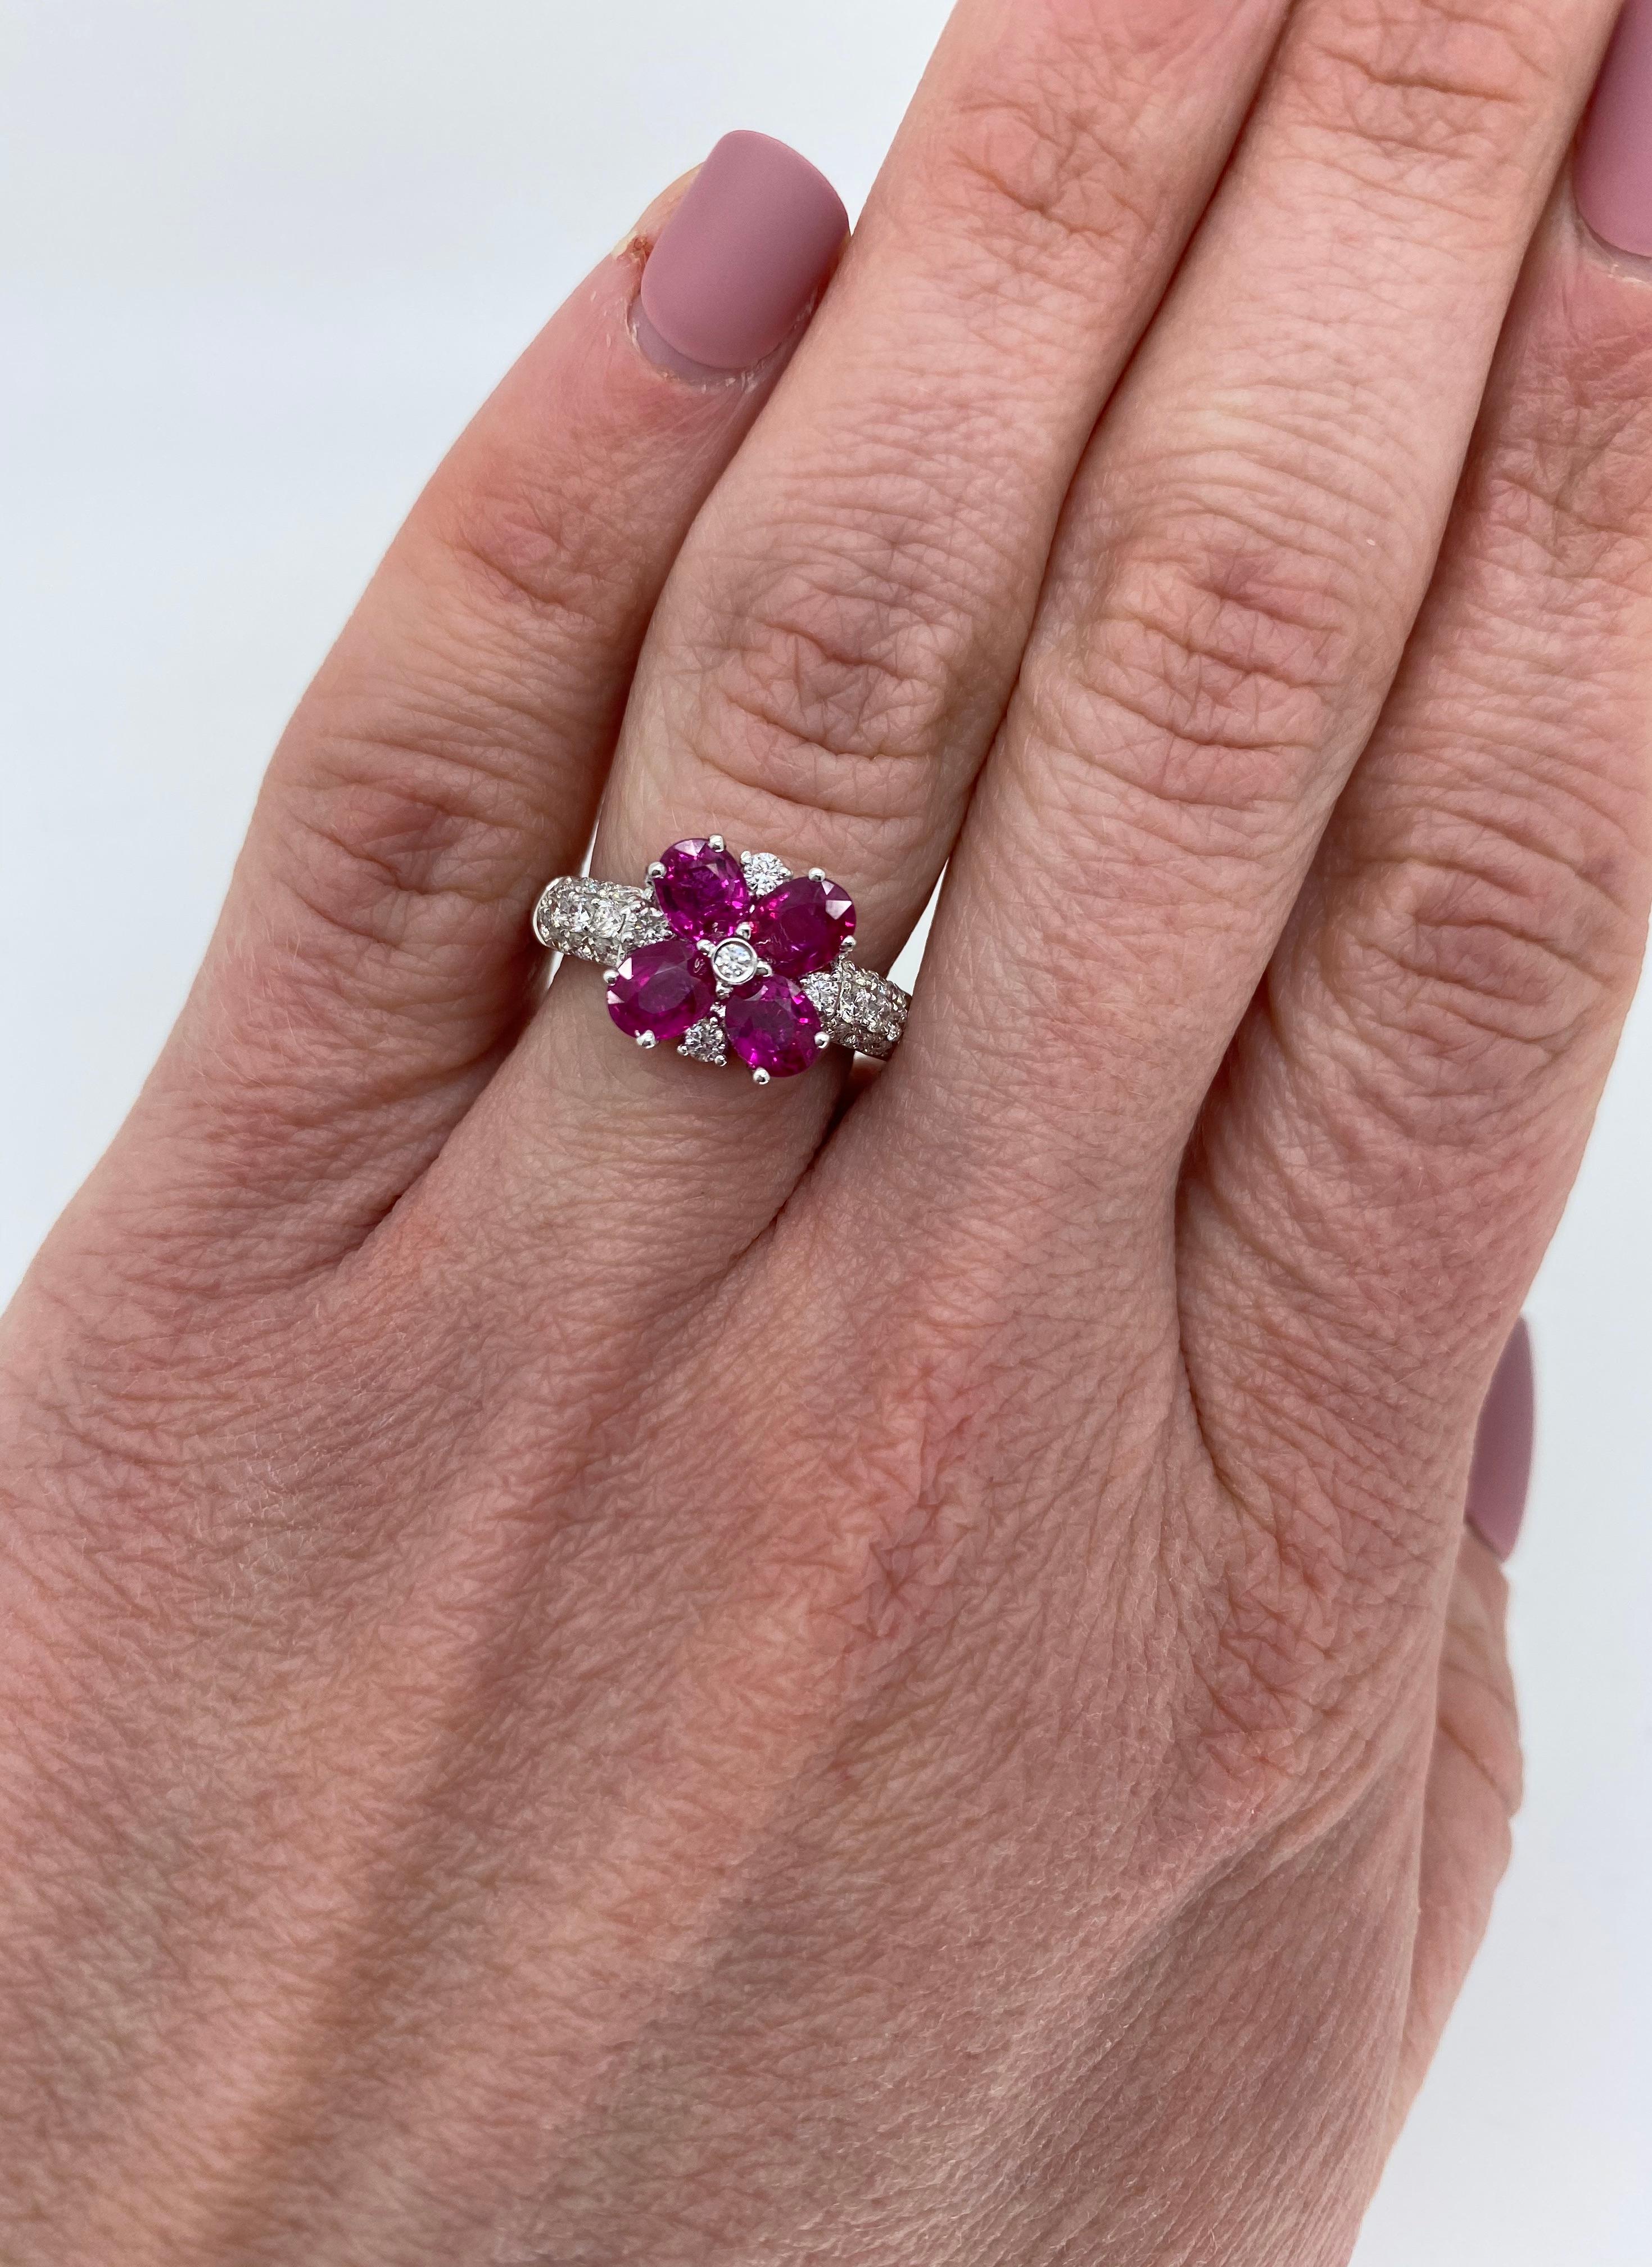 Floral designed ruby and diamond ring crafted in 18k white gold 

Gemstone: Ruby & Diamonds
Gemstone Carat Weight:  Approximately 1.77CTW
Diamond Carat Weight:  Approximately .48CTW
Diamond Cut: Round Brilliant Cut
Color: Average G-H
Clarity: